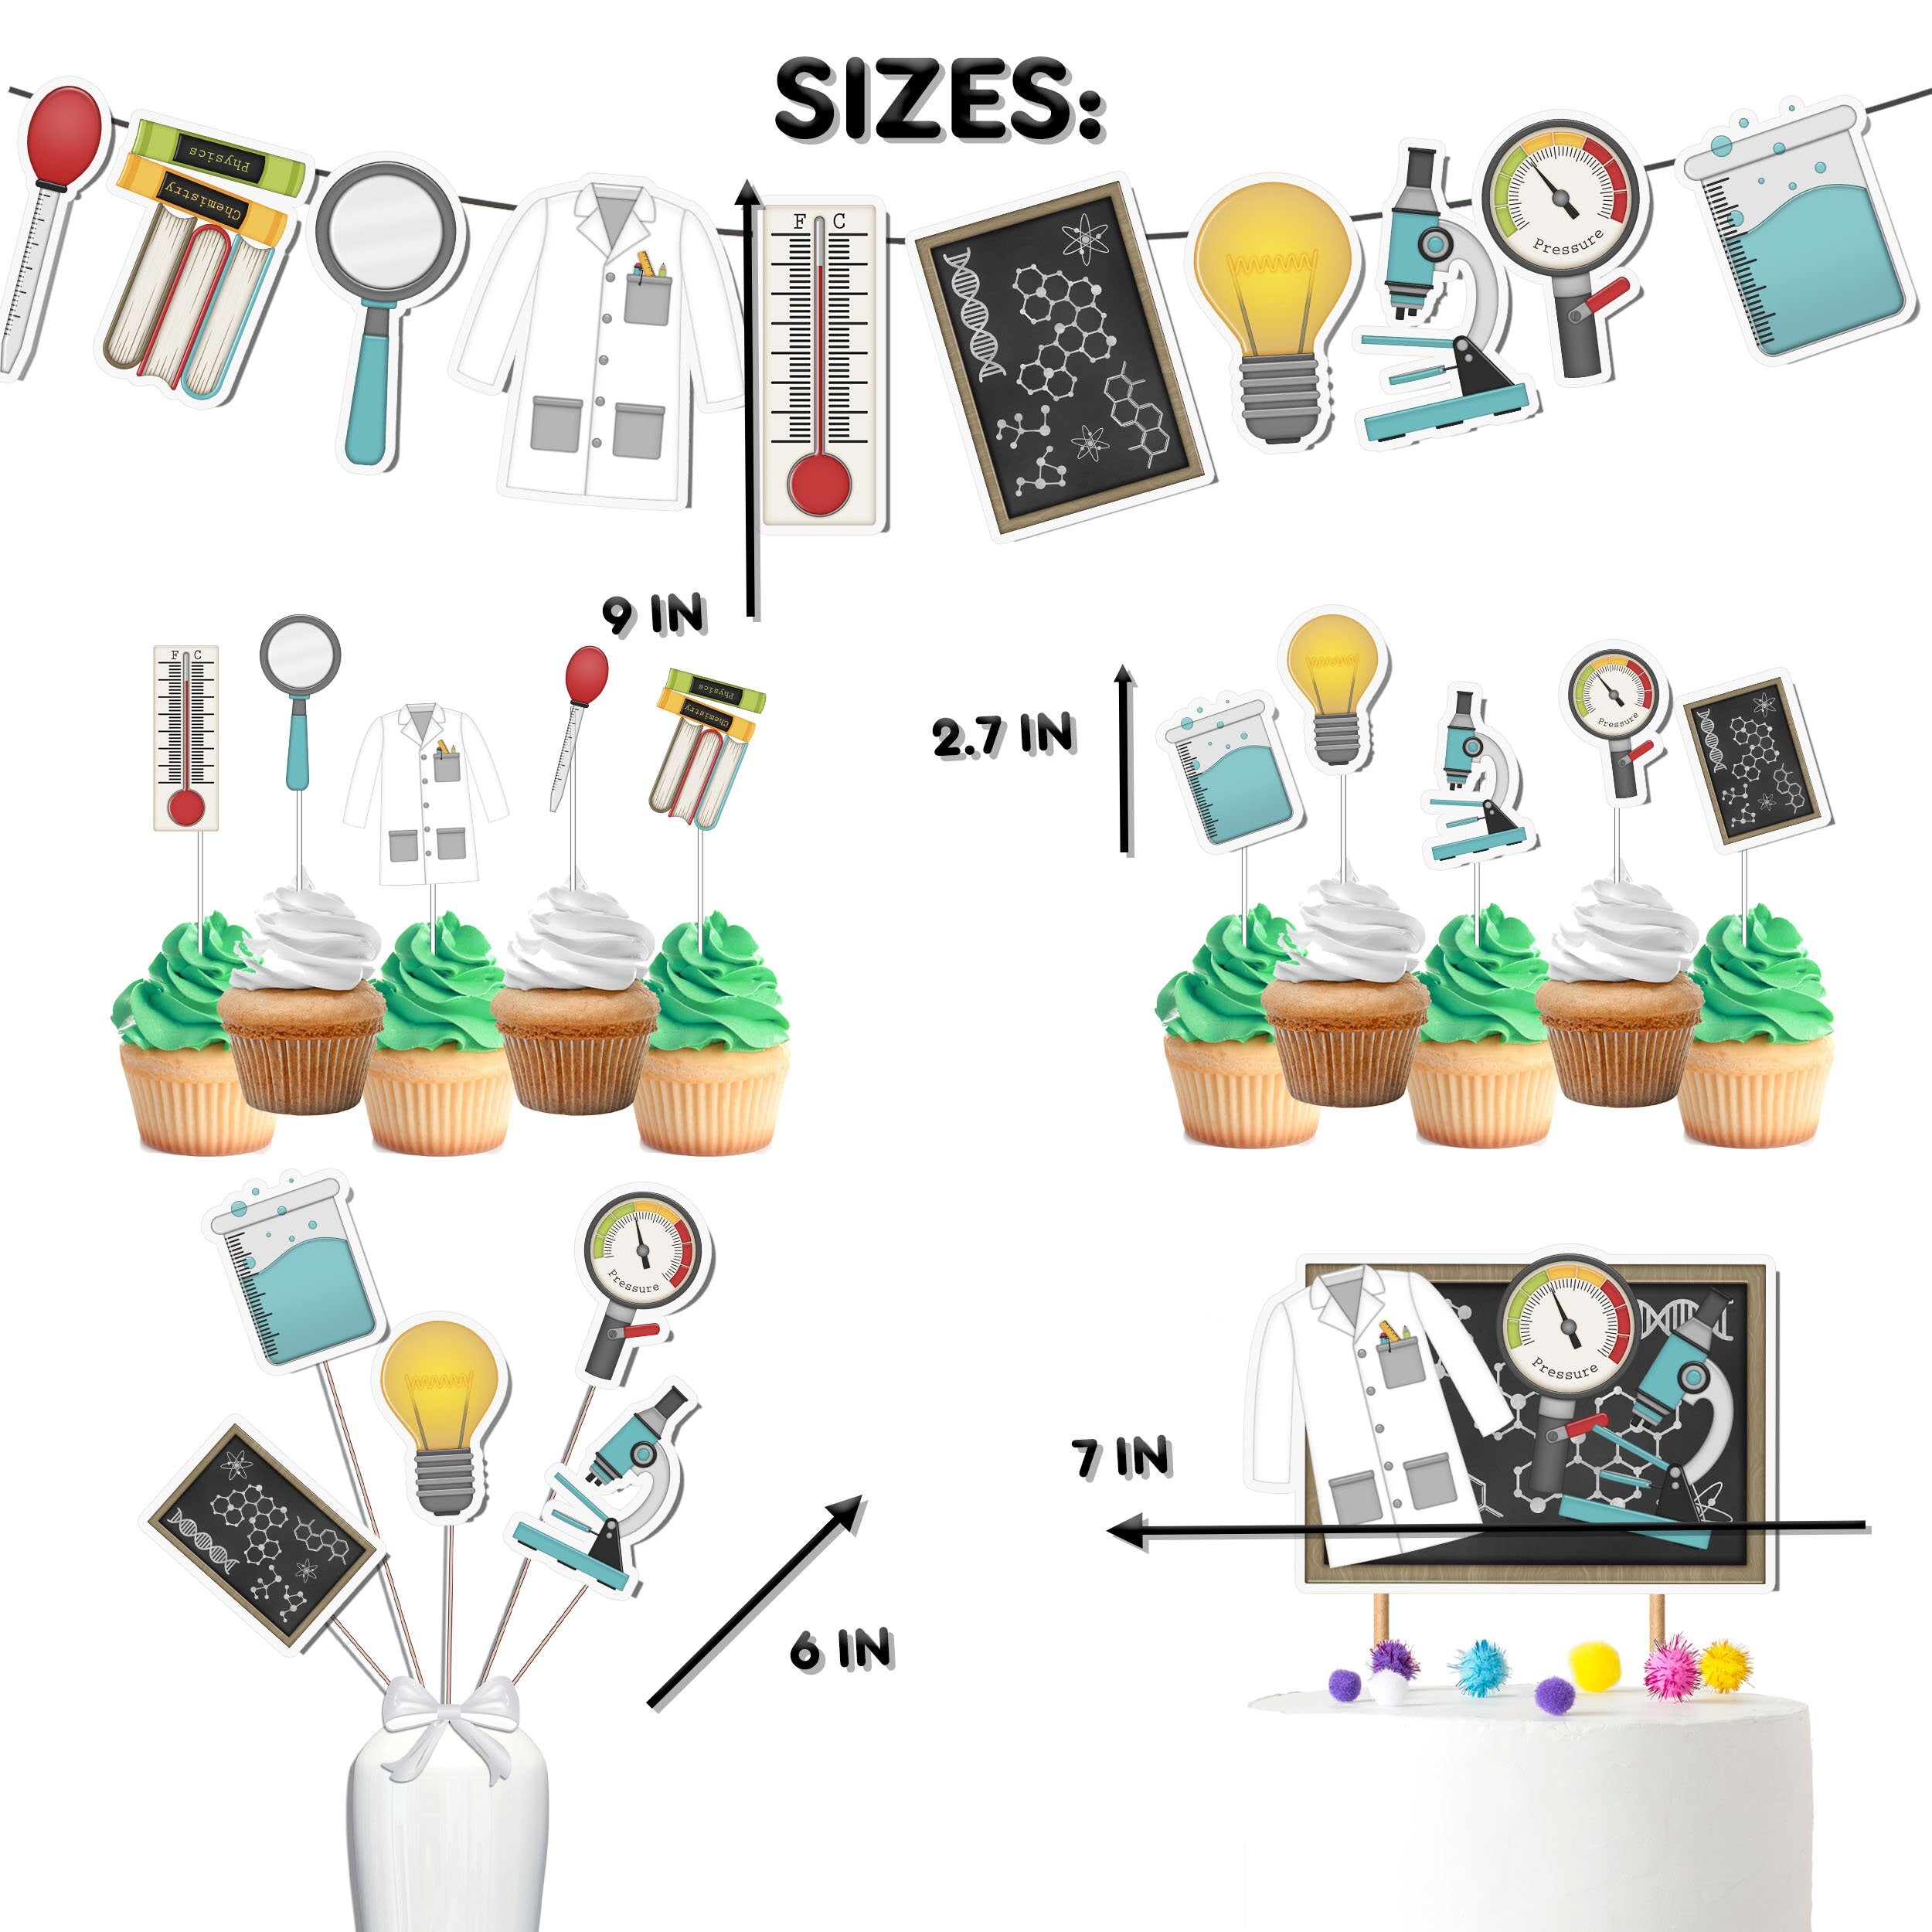 Eureka! Science Party Decor Set - Inspiring Cake Topper, Cupcake Toppers, Centerpieces & Banner - Perfect for a Brilliant Birthday Bash